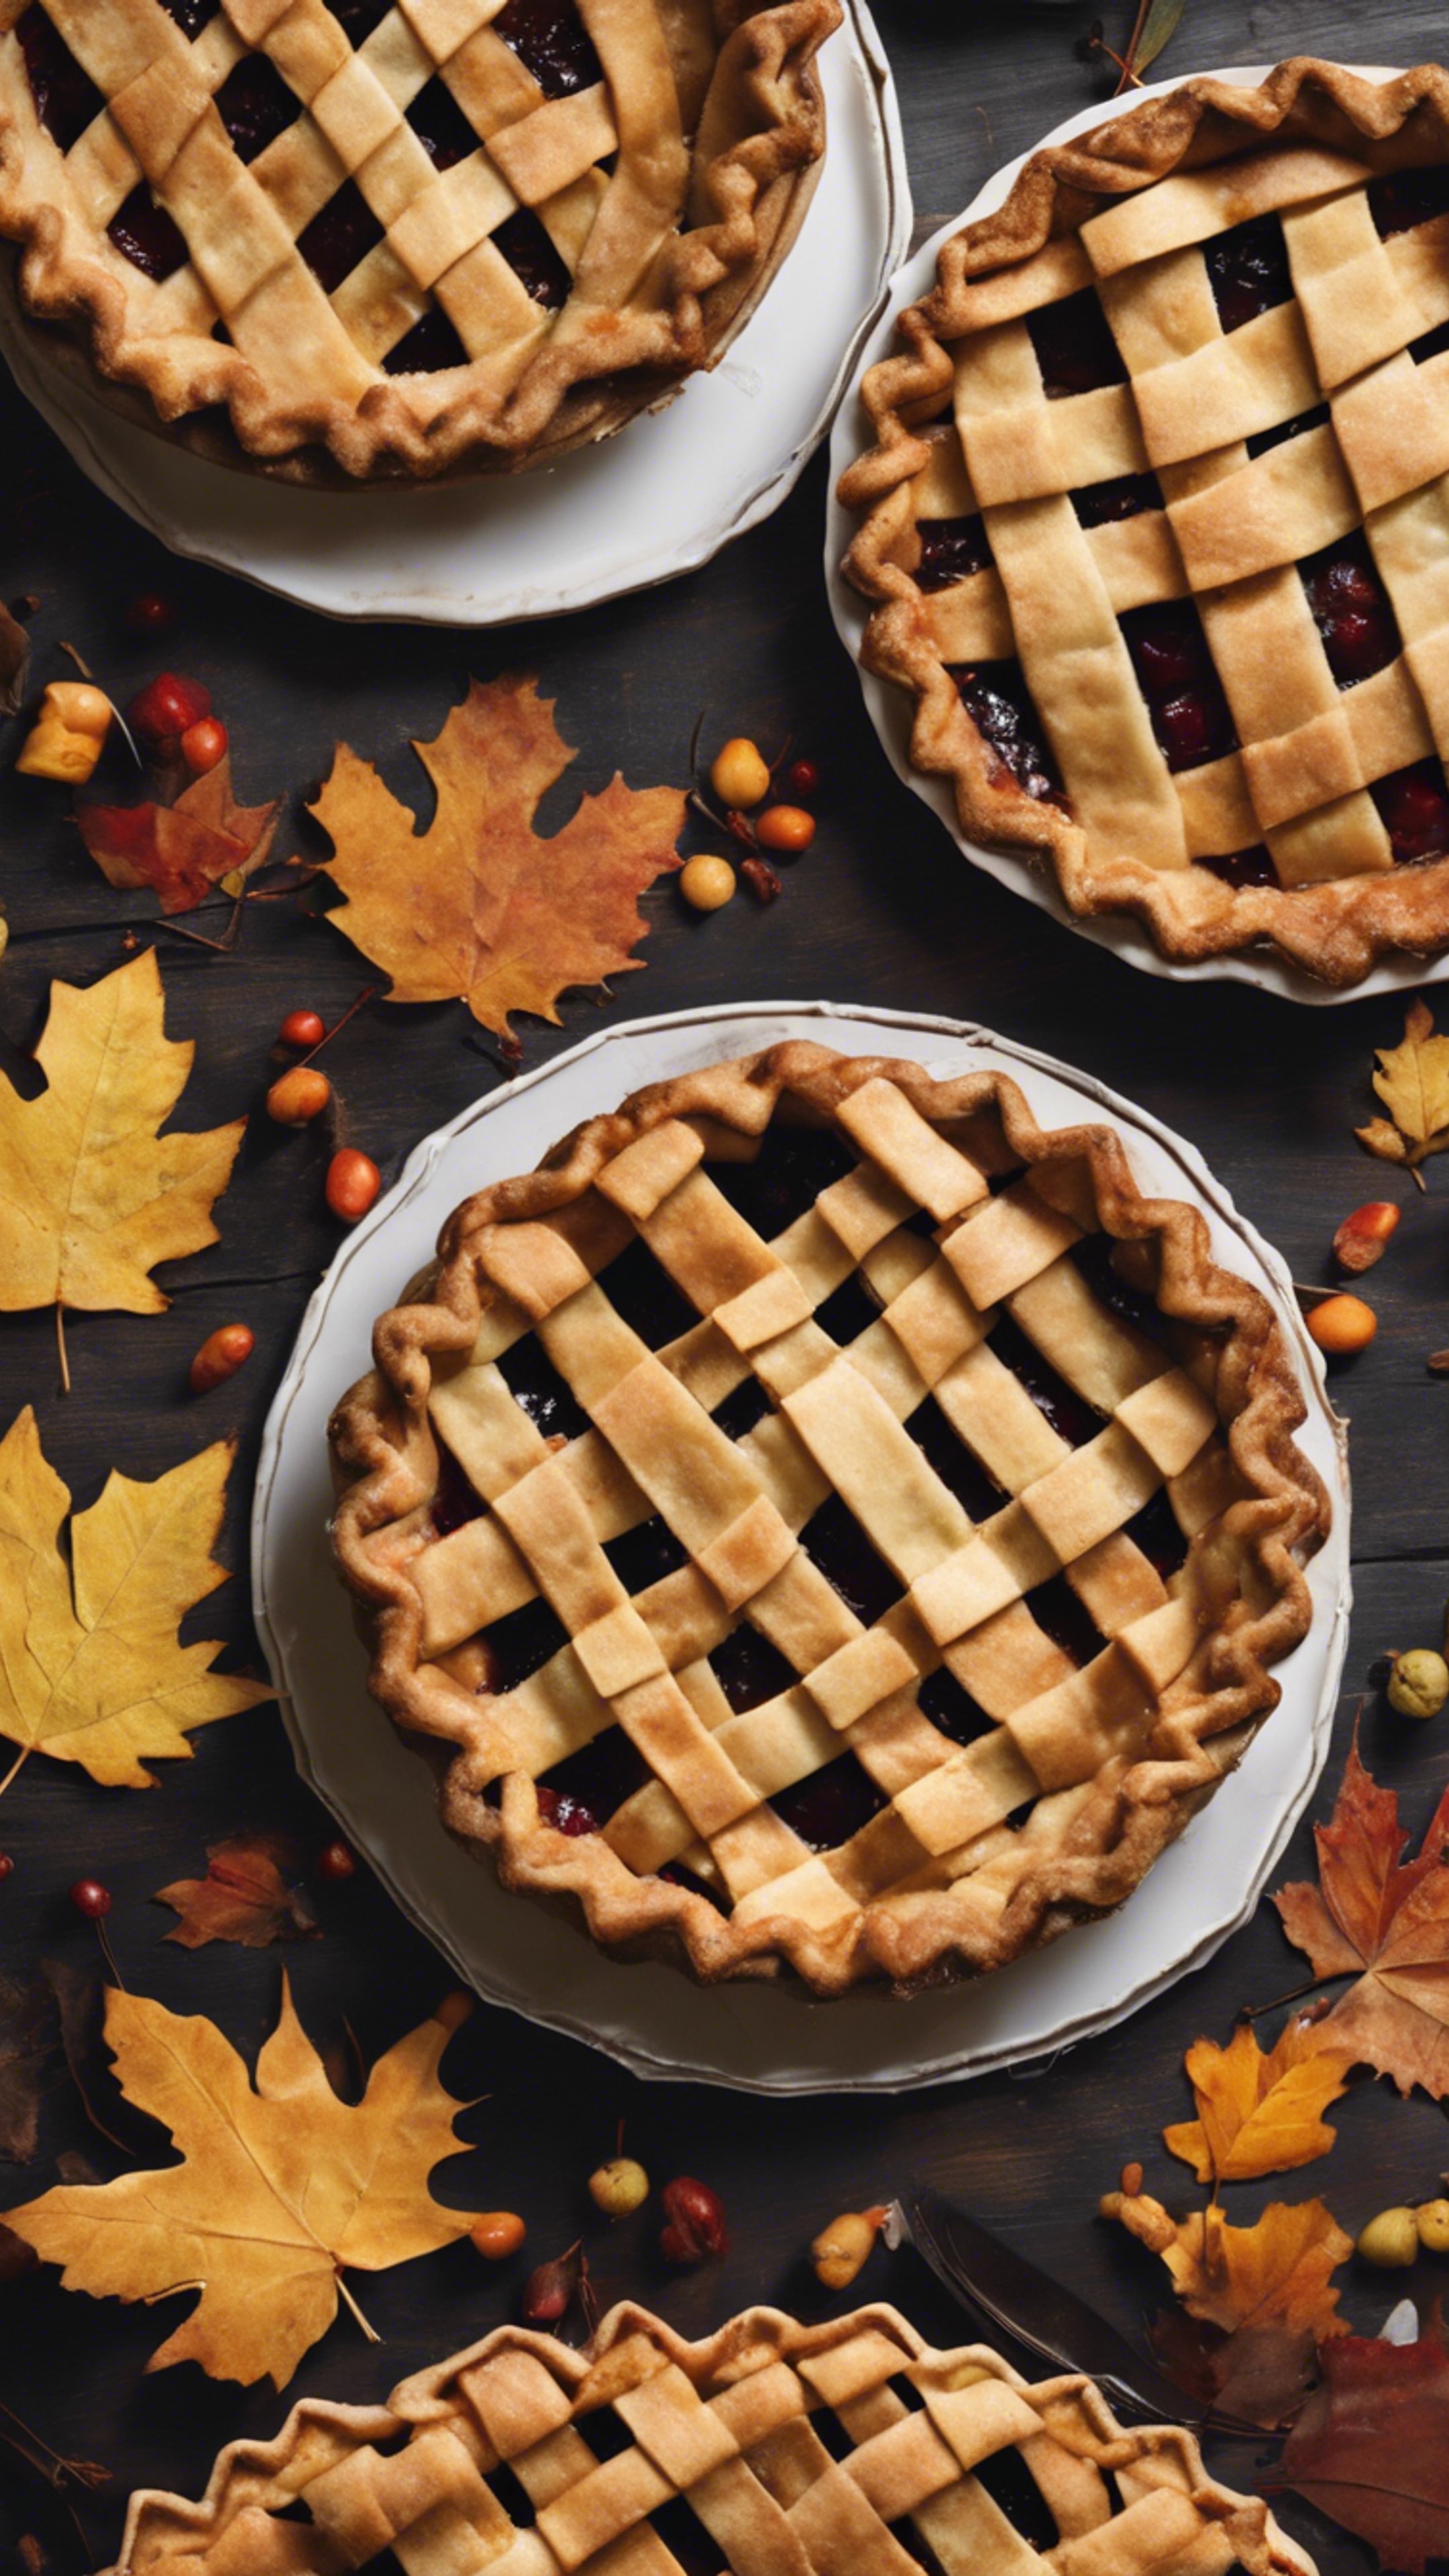 A stylized image of homemade pies decorated with intricate lattice work and autumn leaf pie crusts for an aesthetic Thanksgiving. Валлпапер[93a52954e57a4efda909]